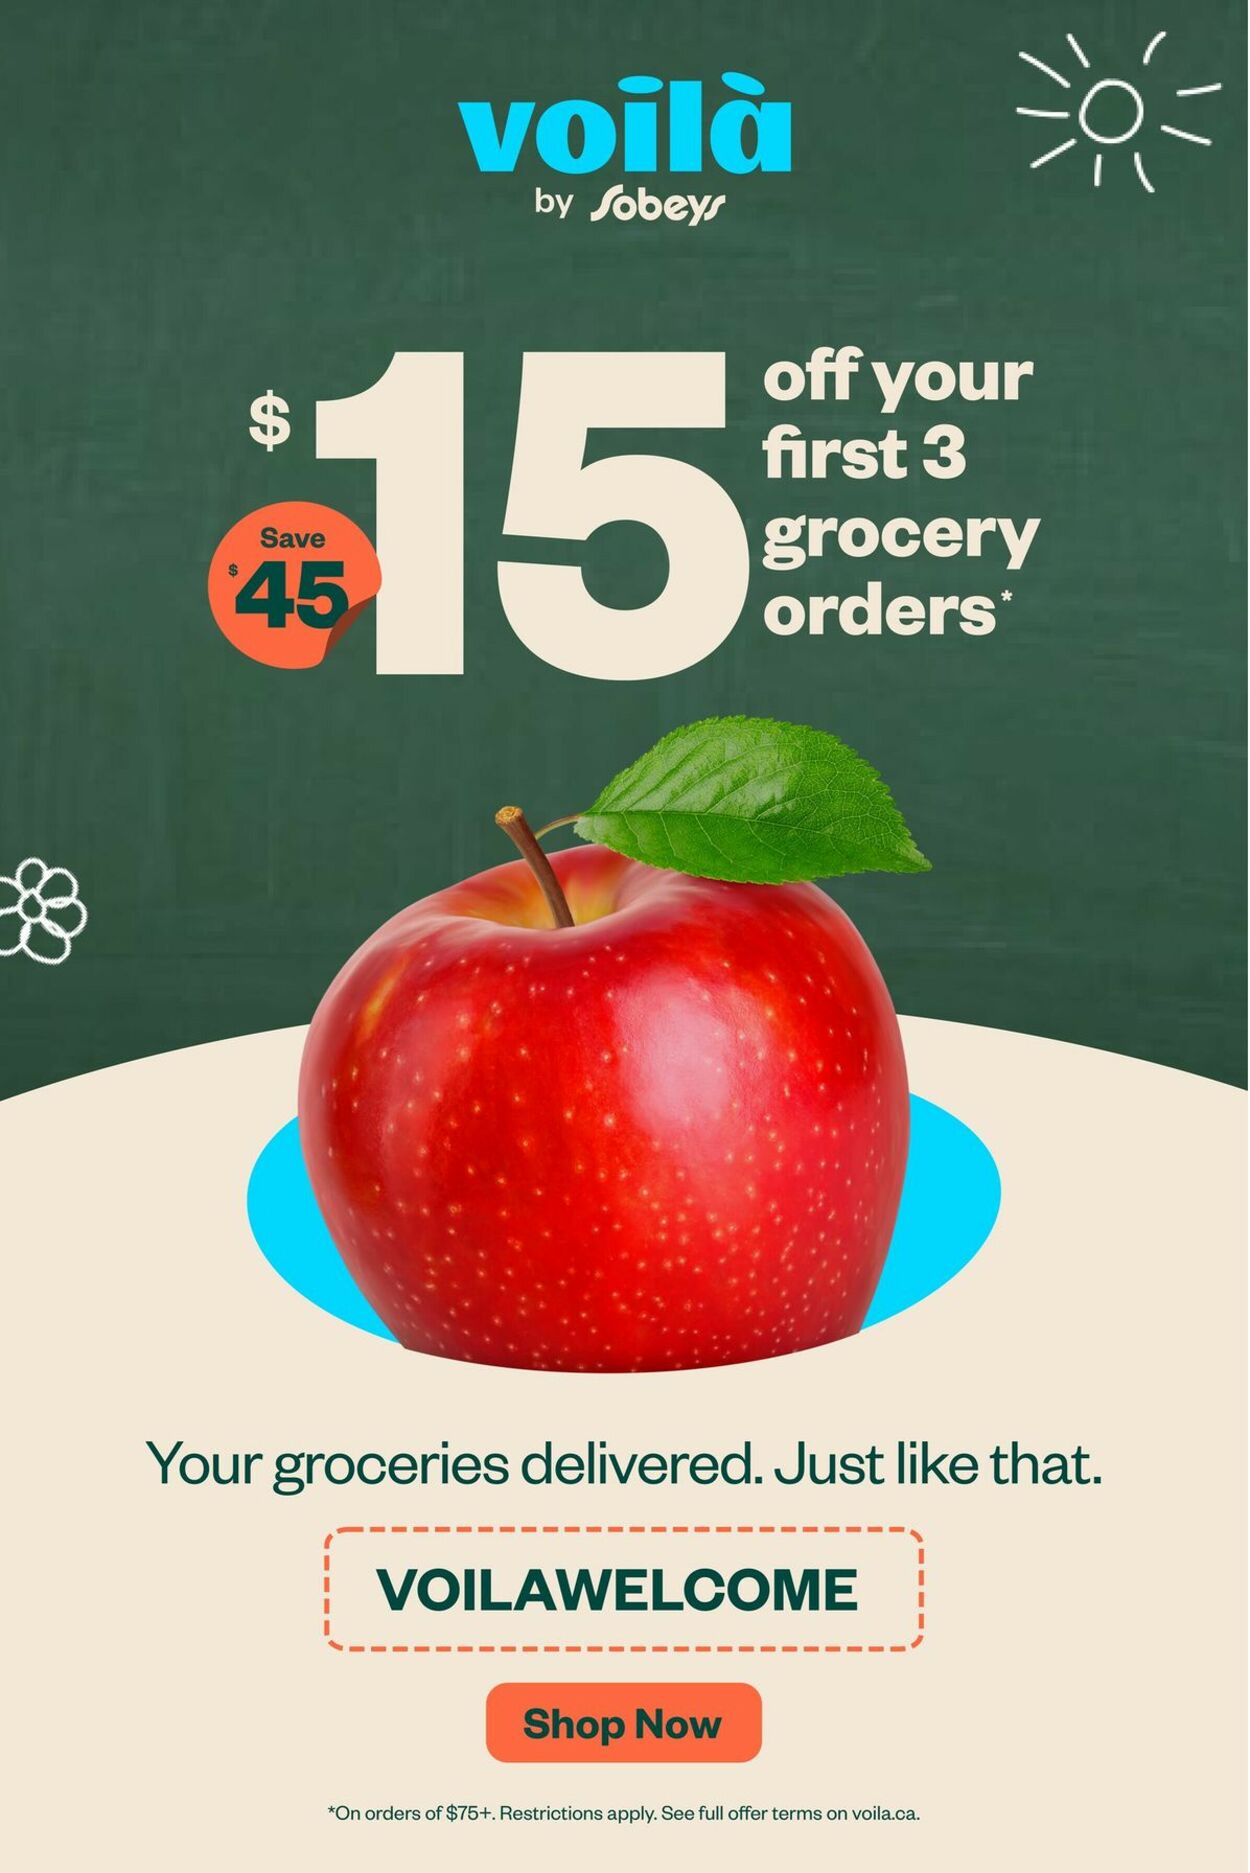 Sobeys Flyer from 09/01/2022